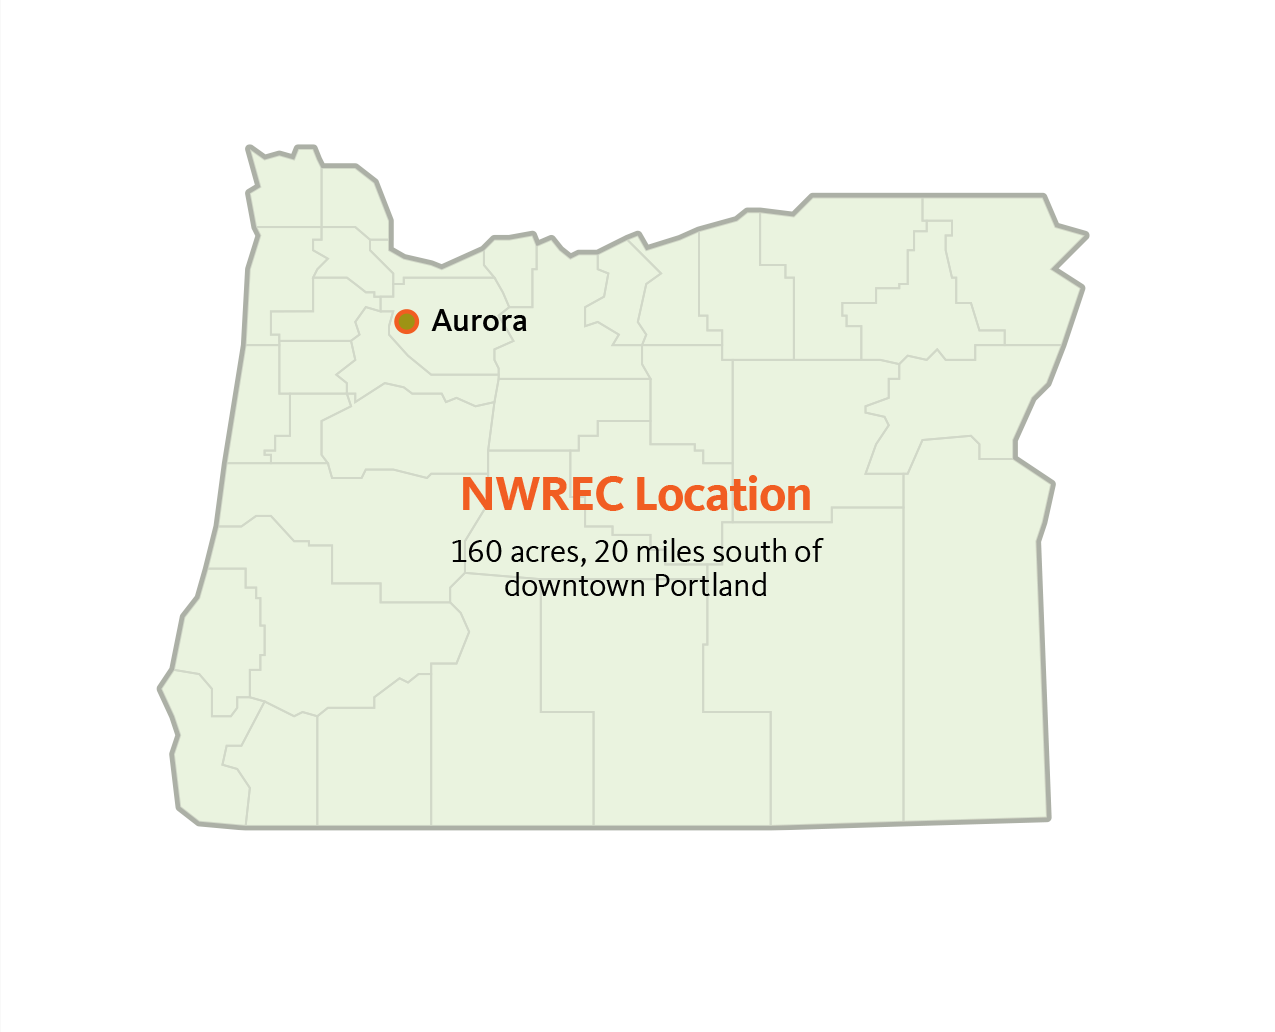 NWREC location marked on an Oregon map